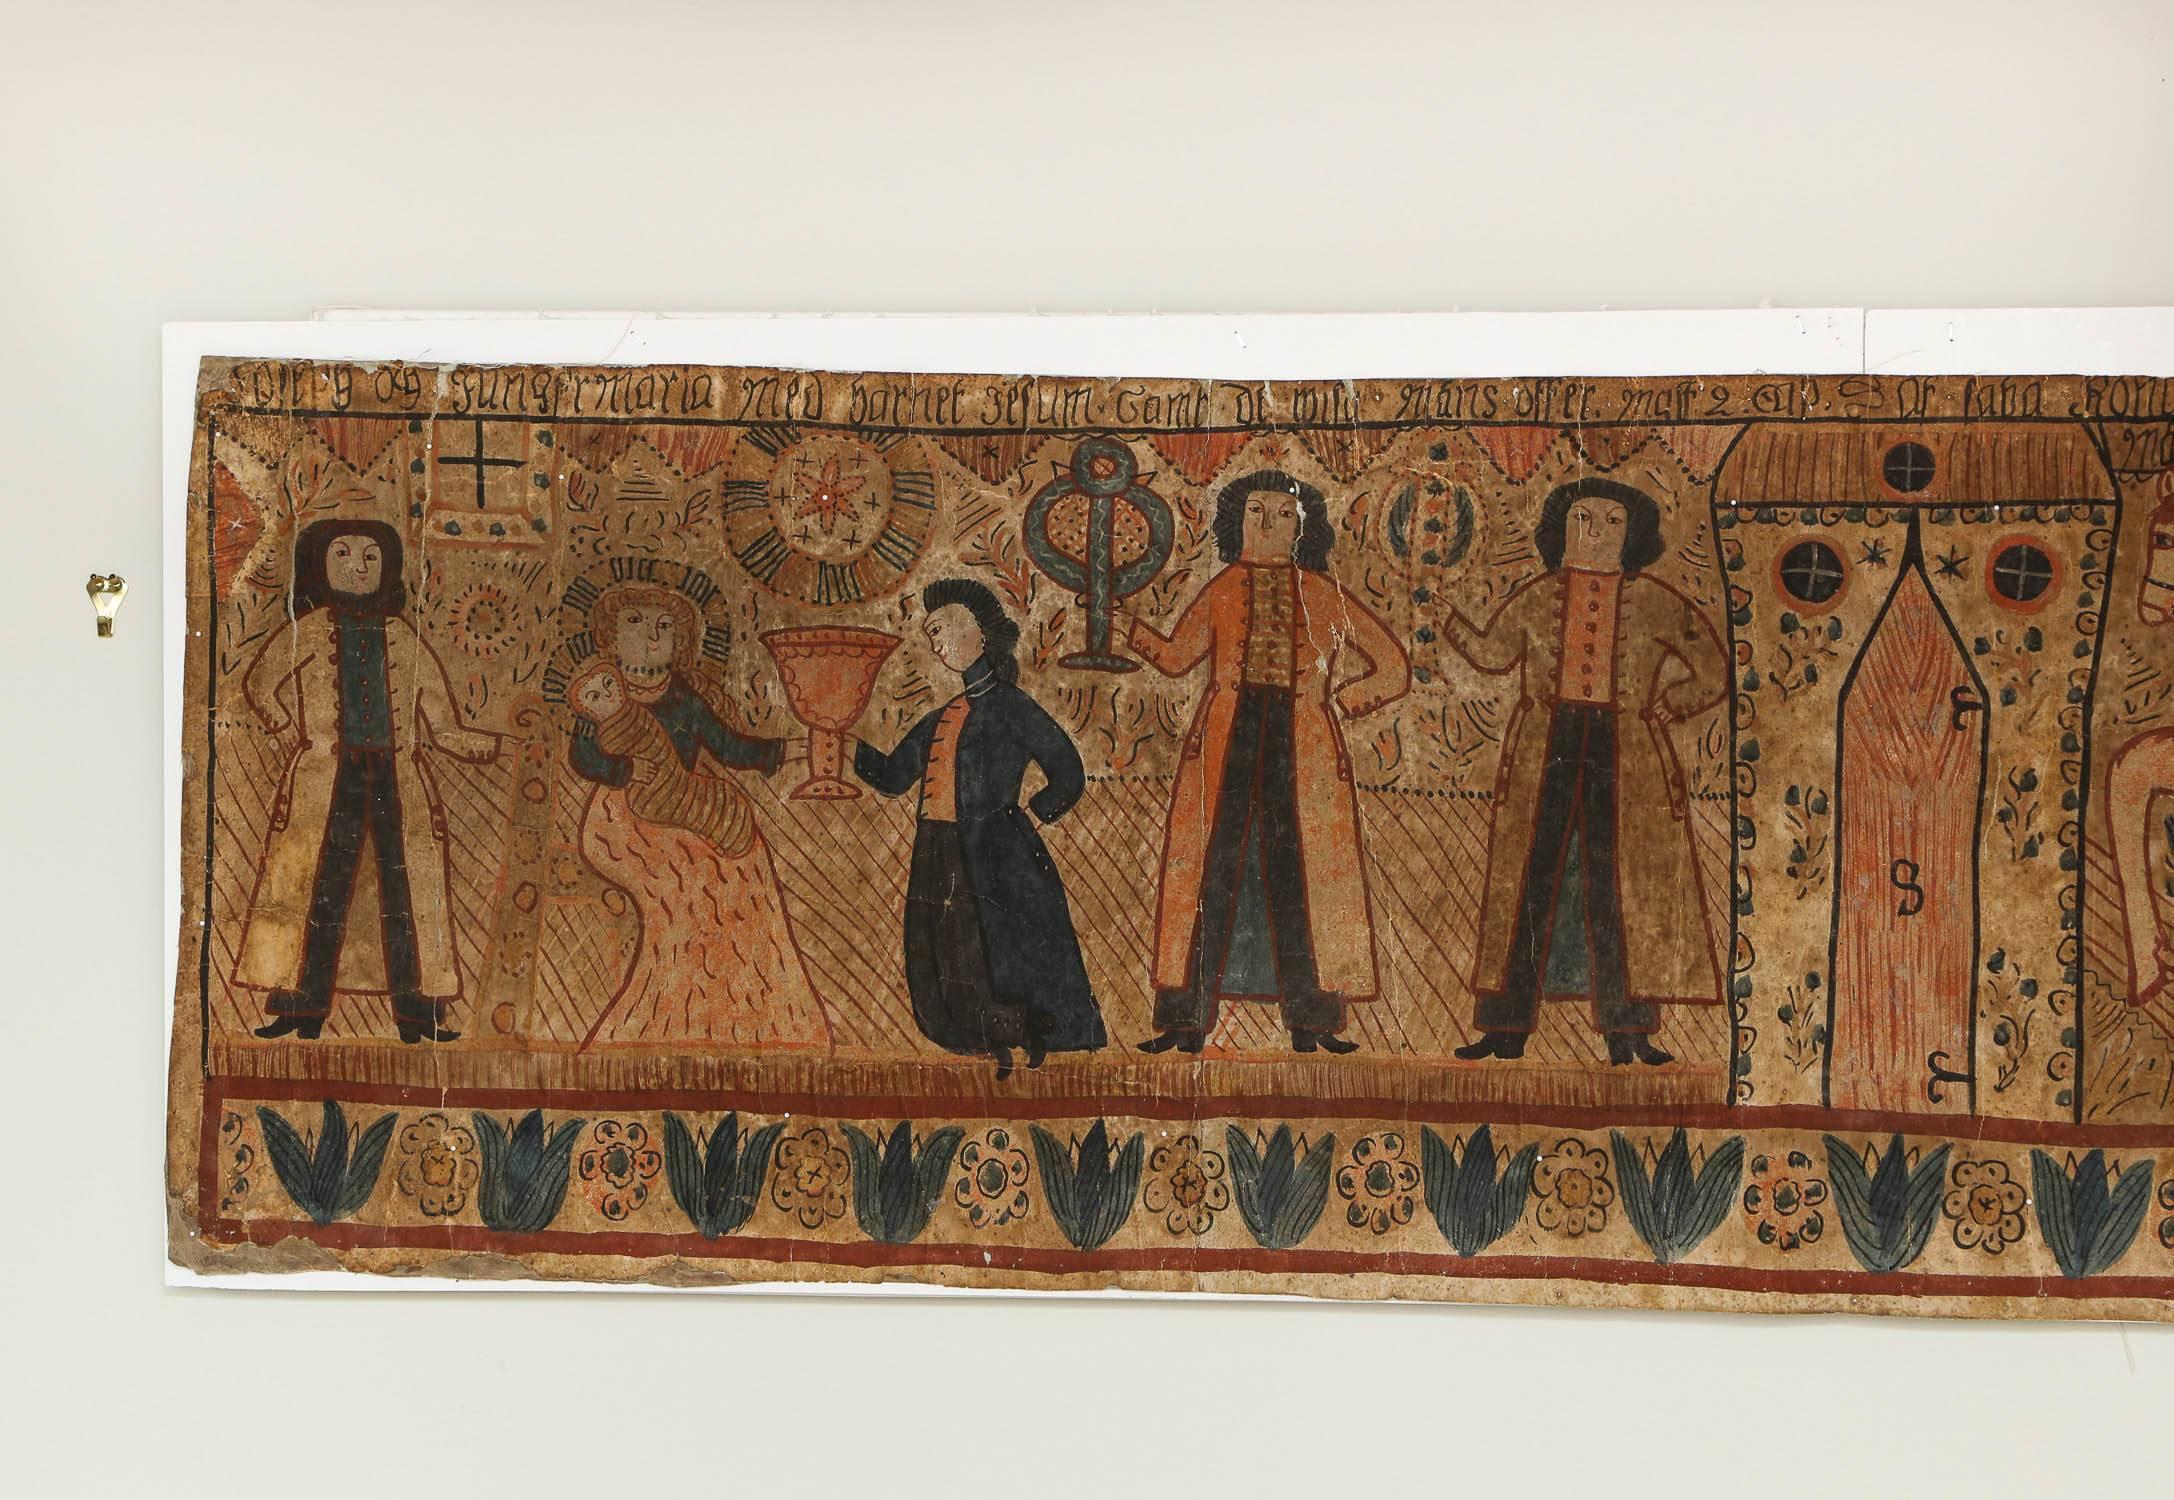 A folk art wall panel hand painted by an itinerant artist in Sweden in 1837 (dated), depicting the nativity, with the three kings on horseback paying homage to Mary seated on a throne with baby Jesus in her arms, with other figures offering gifts,